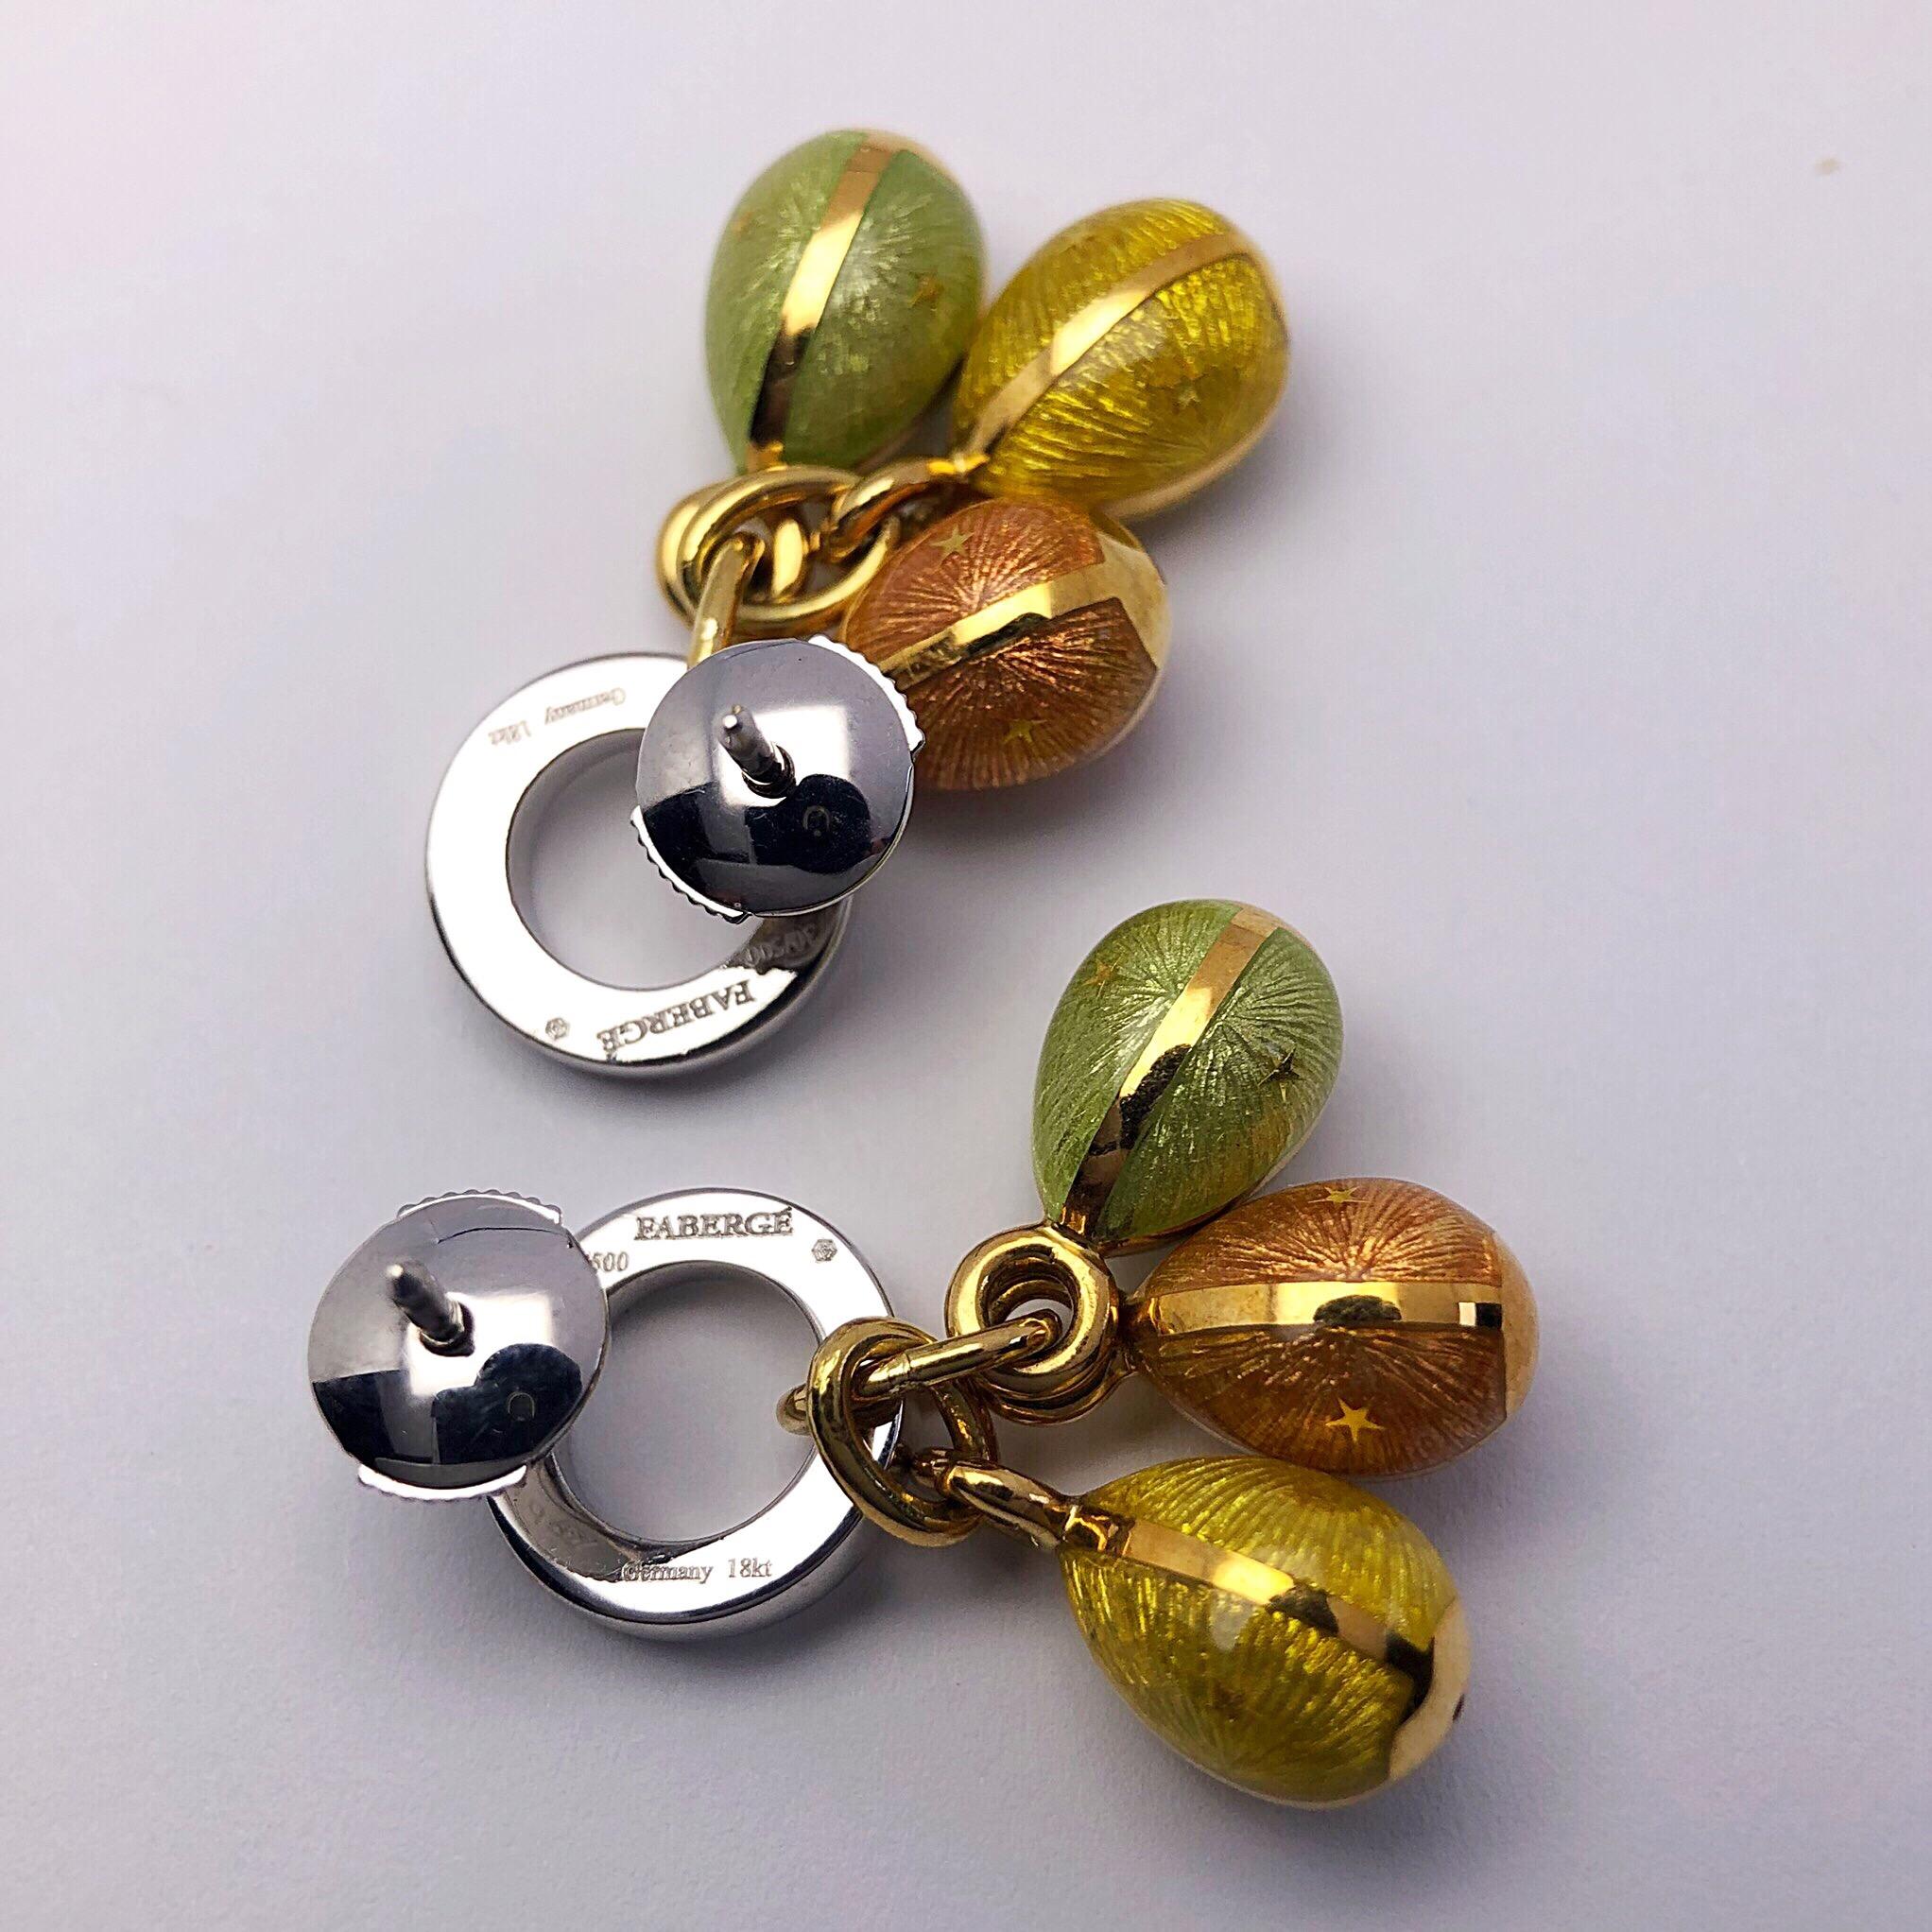 These modern 18 karat yellow gold Faberge earrings by Victor Mayer feature 3 hanging eggs in peach, yellow and mint  guilloche enamel. The eggs are hanging from an 18karat white gold and diamond open circle. The earrings have a white gold post back.